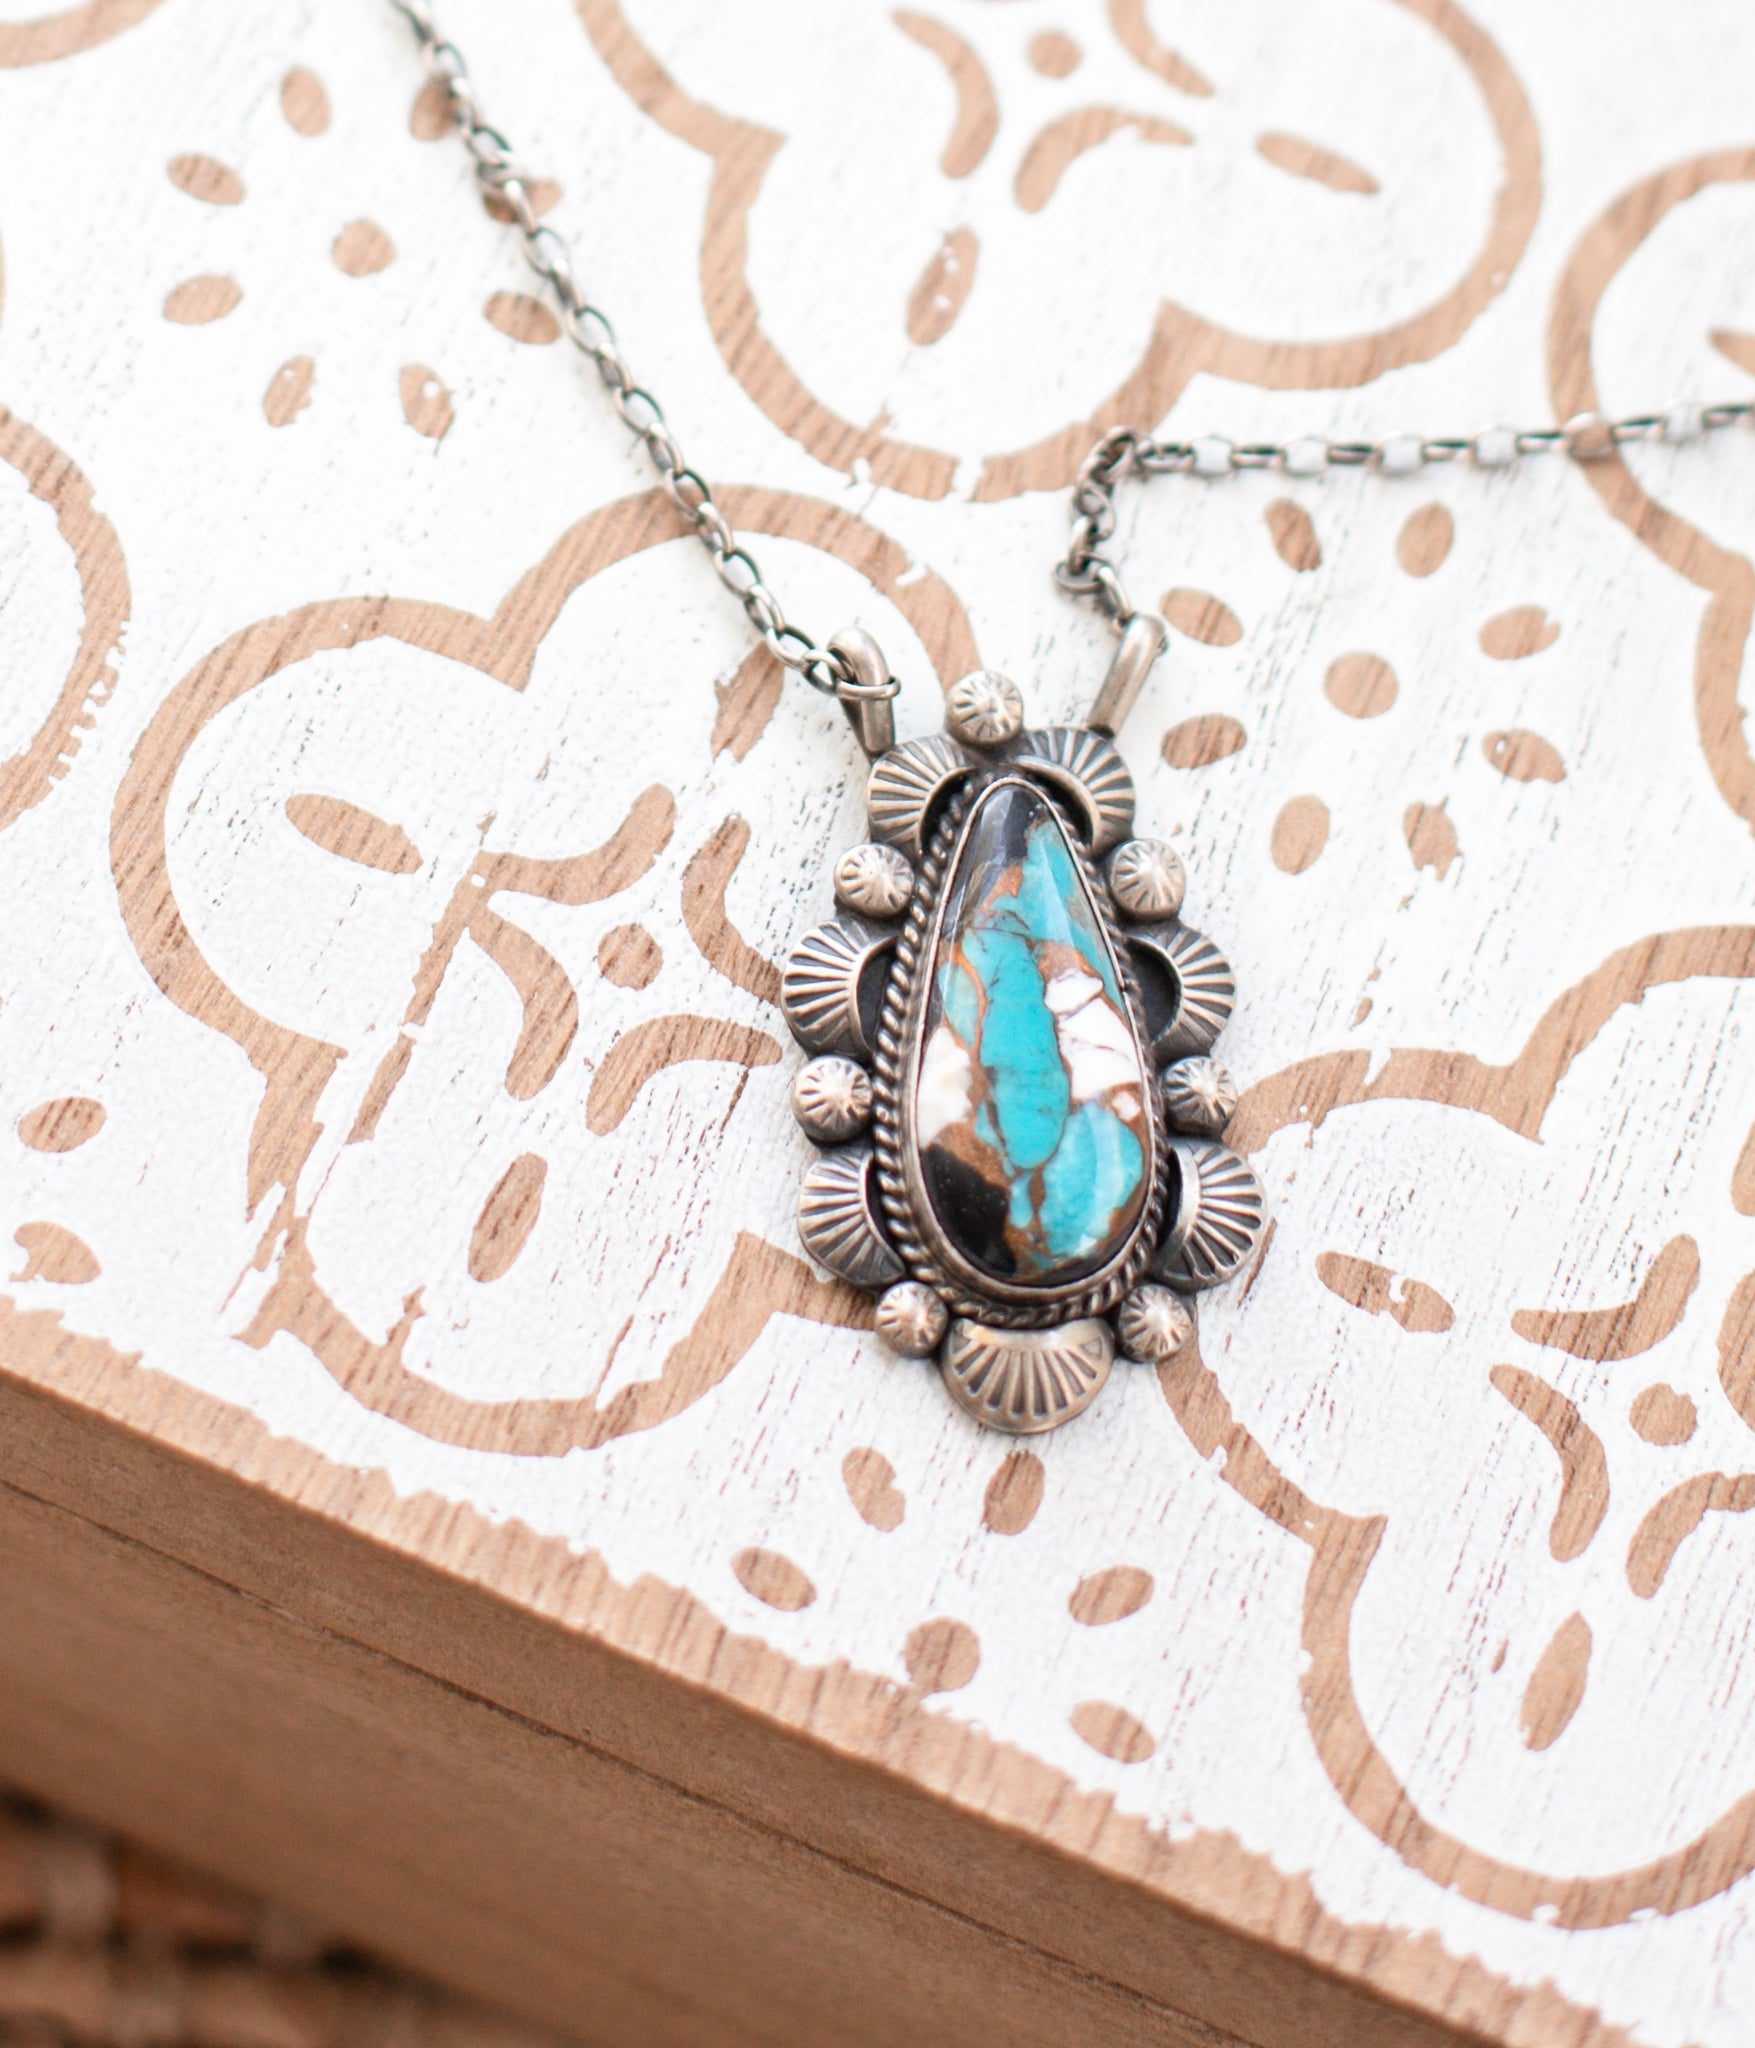 Authentic Onyx, Turquoise and White Buffalo Teardrop Necklace handmade by Navajo Aritsts